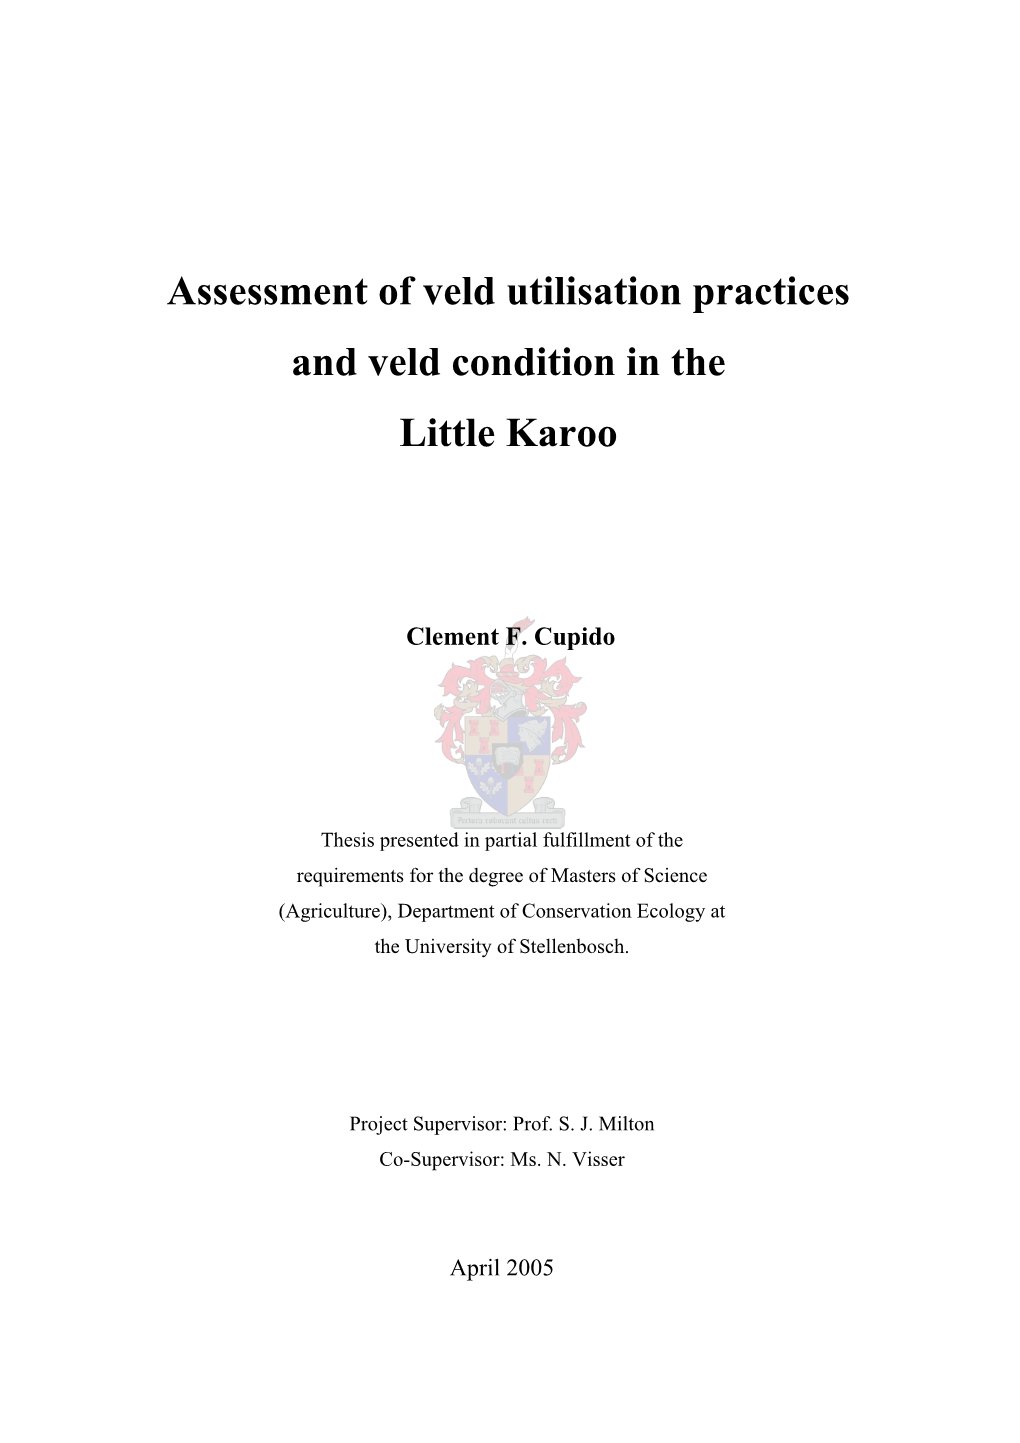 Assessment of Veld Utilisation Practices and Veld Condition in the Little Karoo